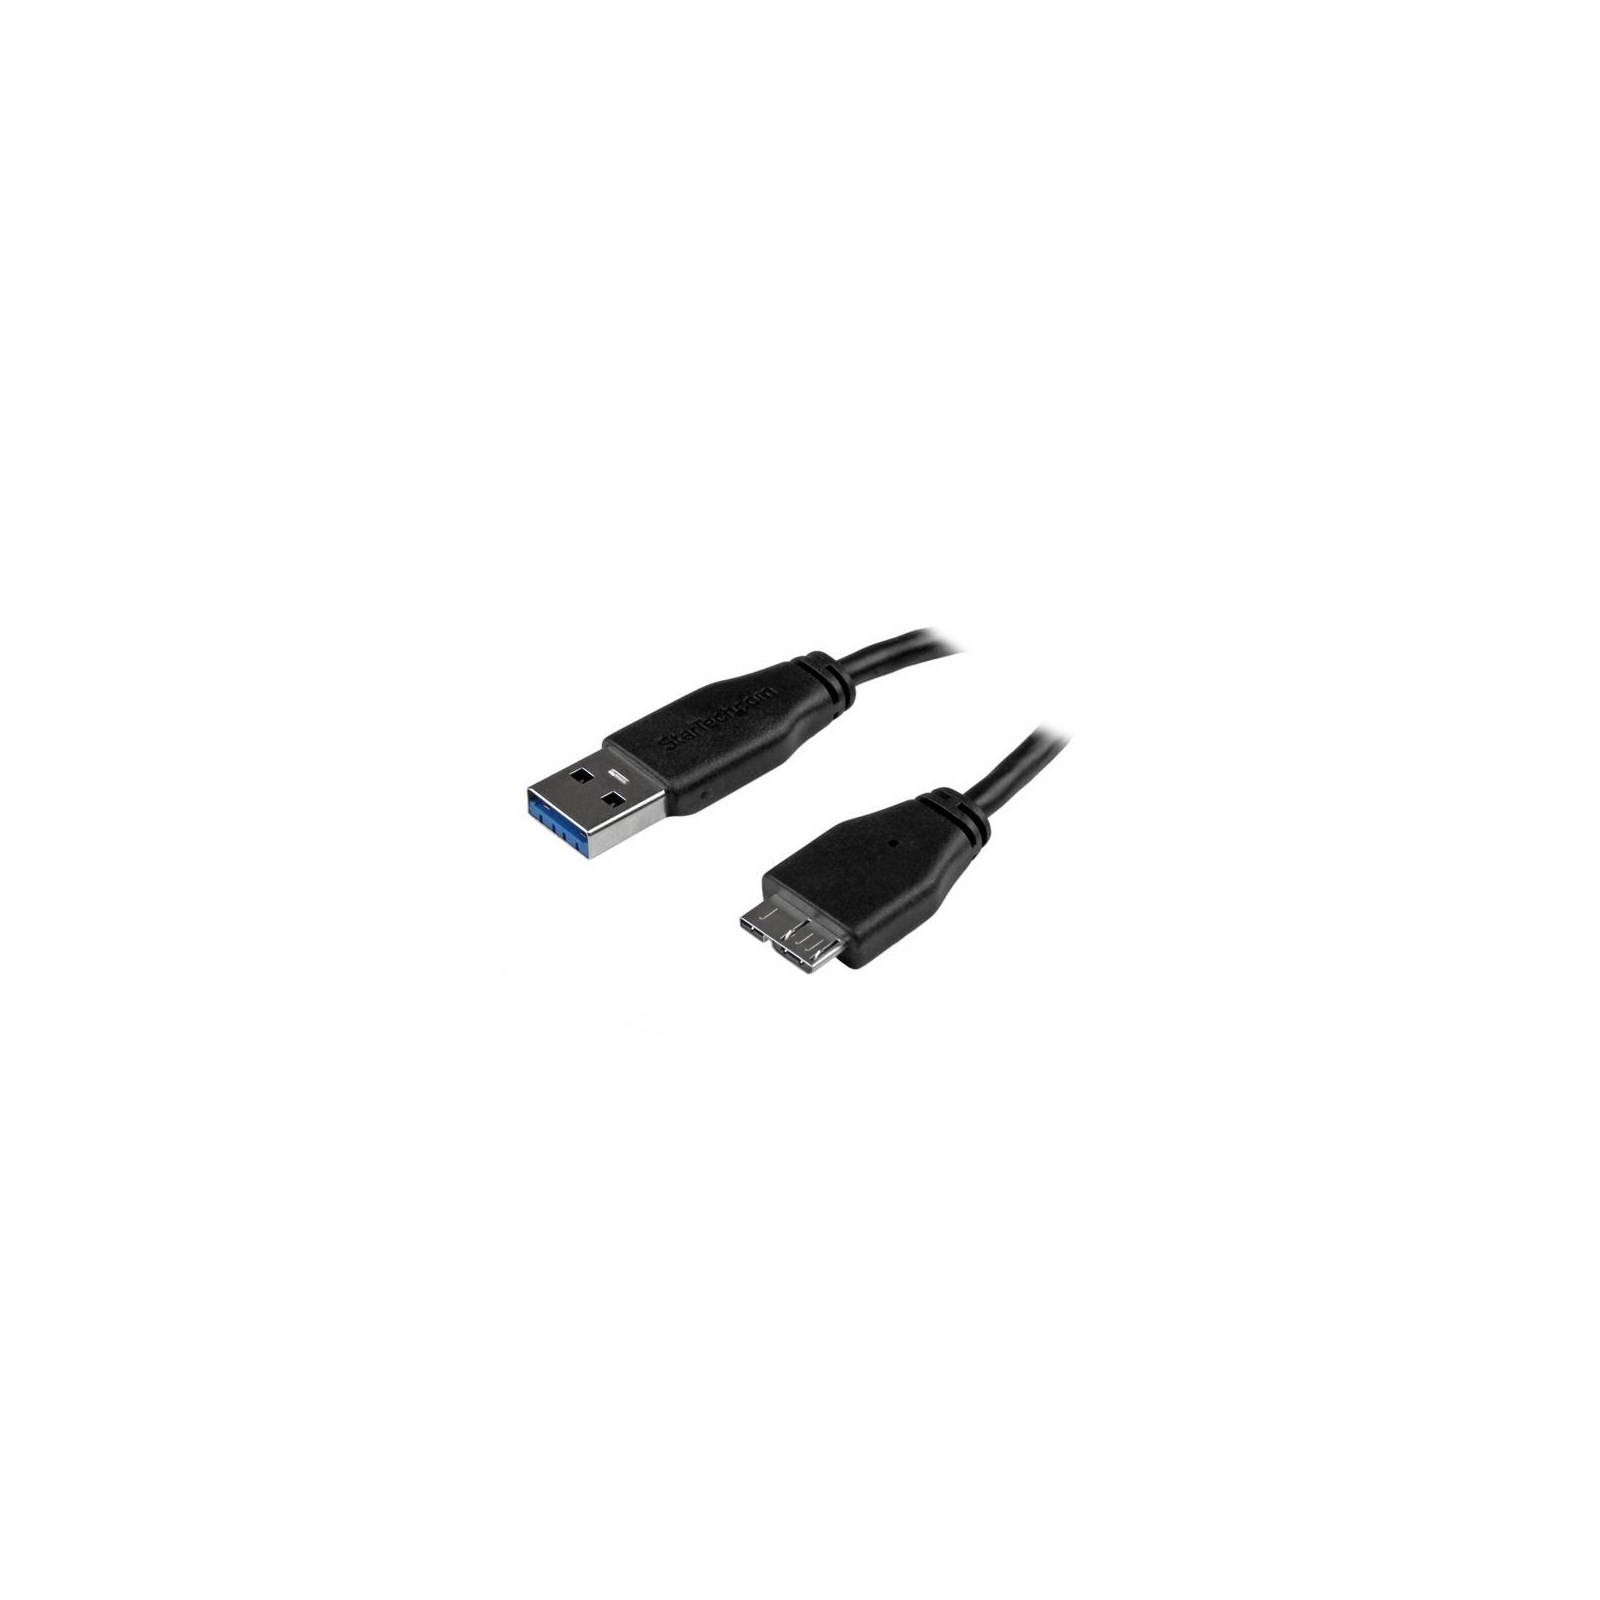 15cm 6in Slim USB 3.0 Micro B Cable - USB 3.0 Cables